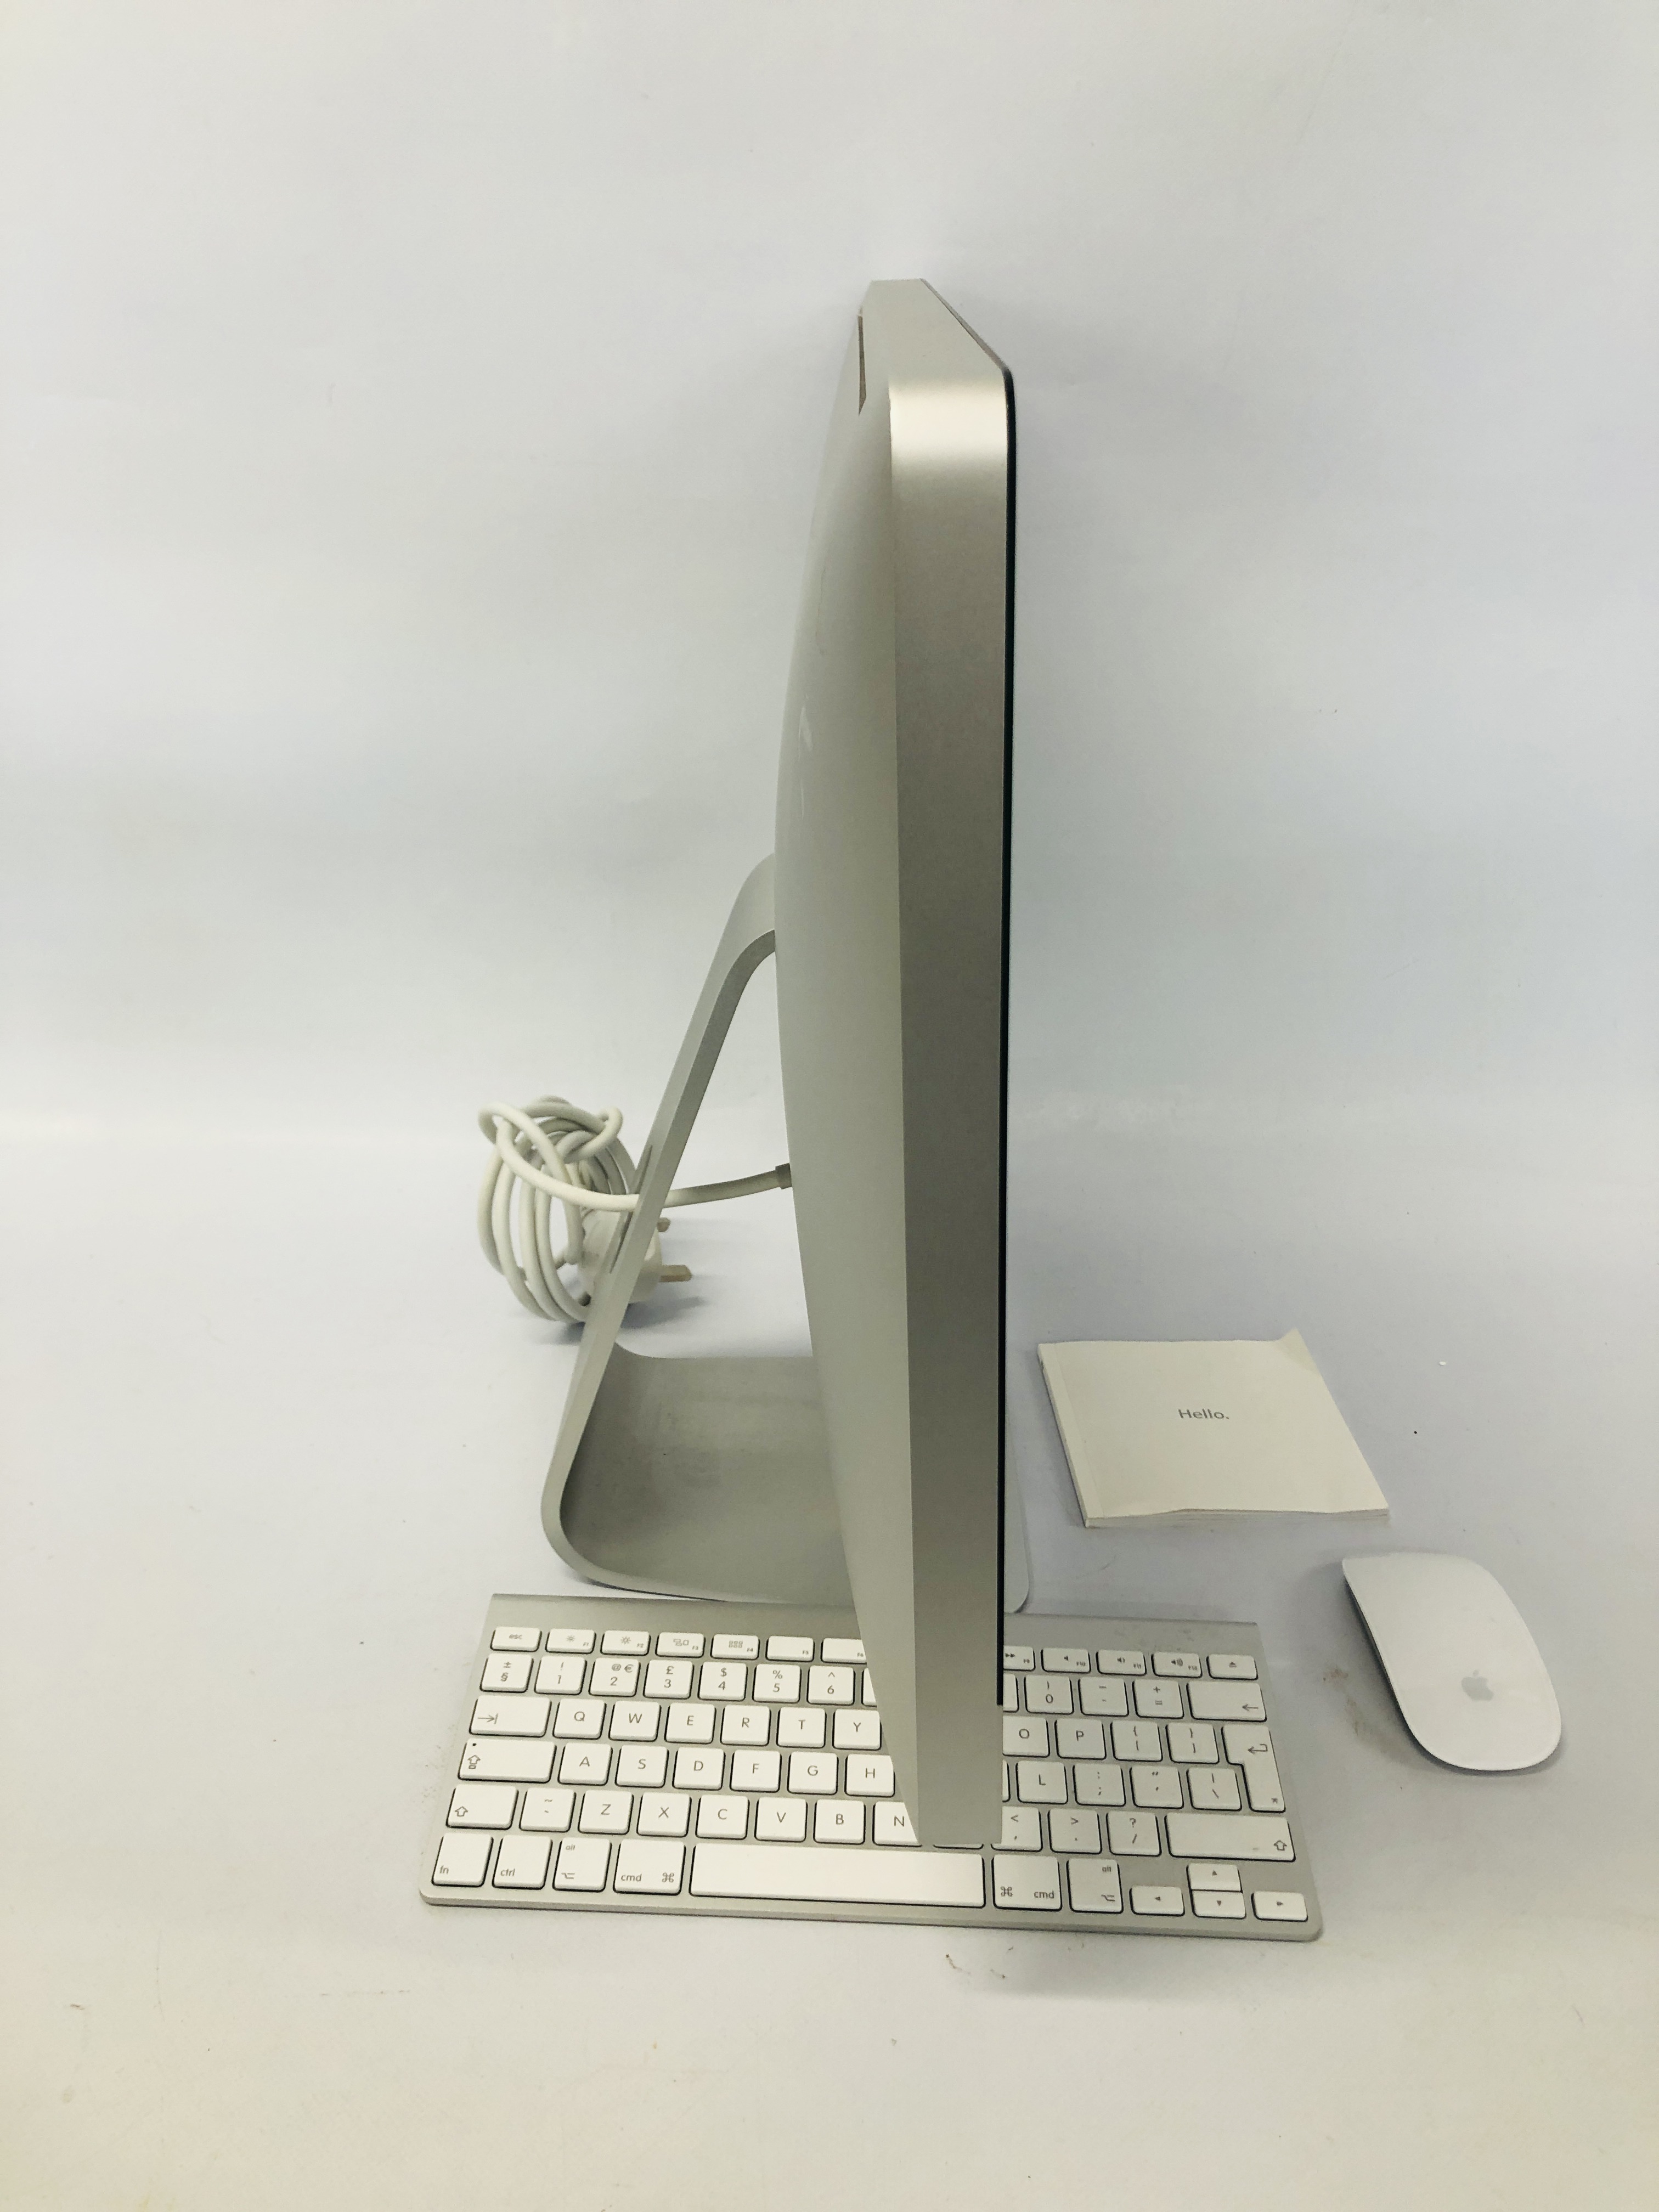 APPLE IMAC DESKTOP COMPUTER MODEL A1311 WITH KEYBOARD AND MOUSE - SOLD AS SEEN - Image 5 of 6